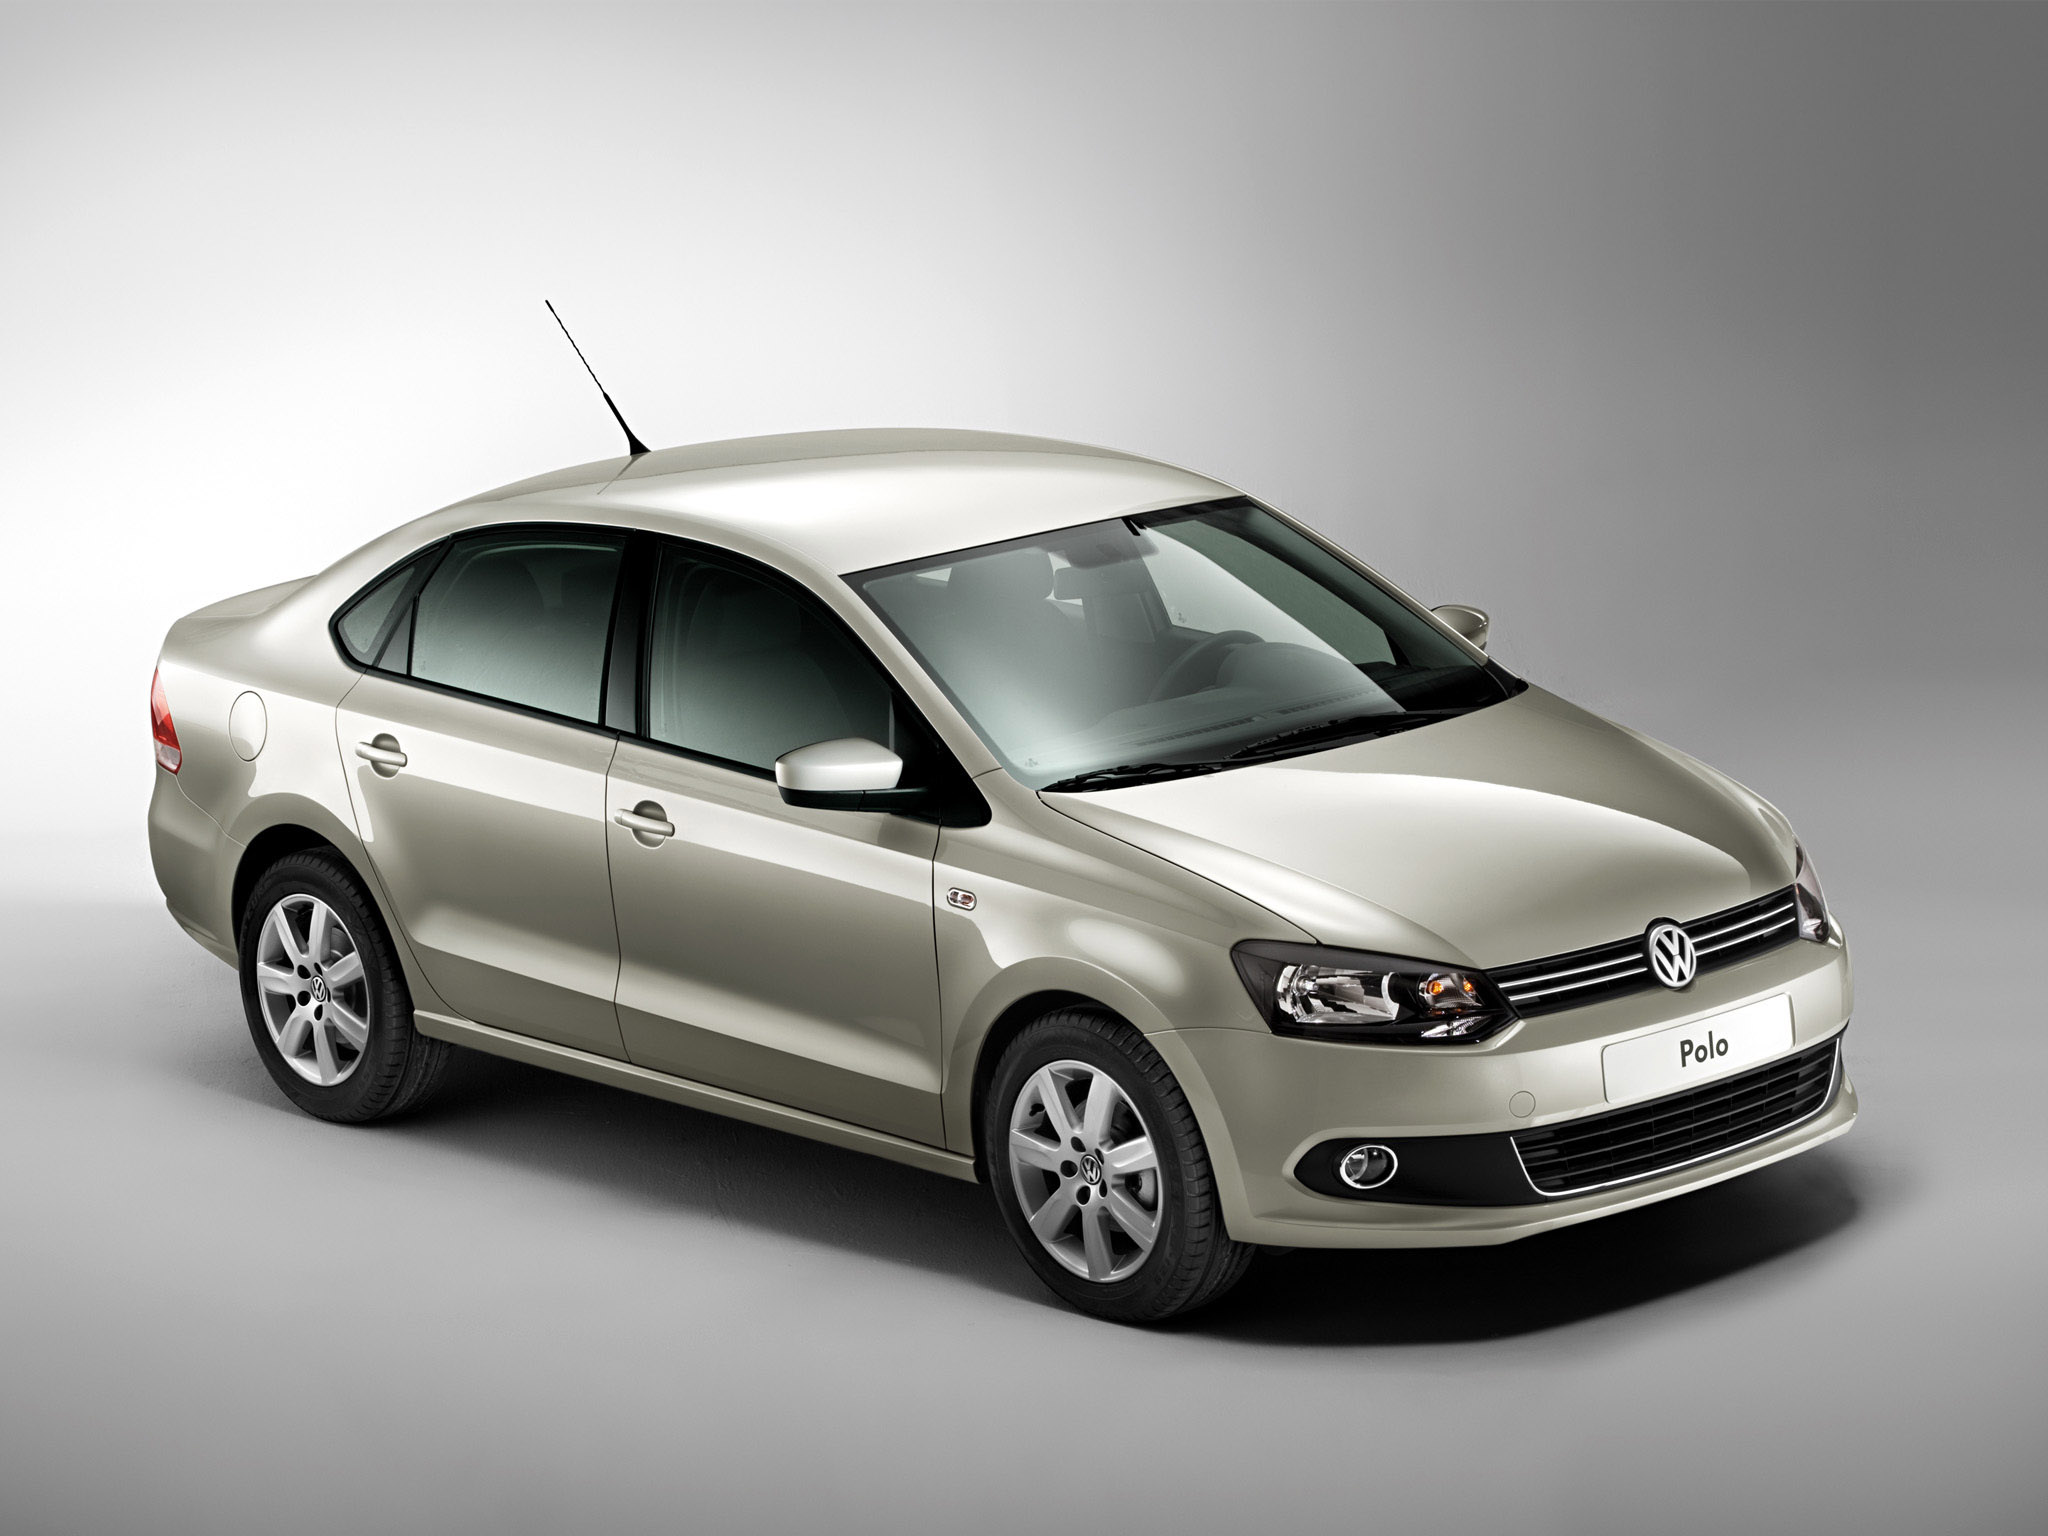 Car in pictures car photo gallery » Volkswagen Polo